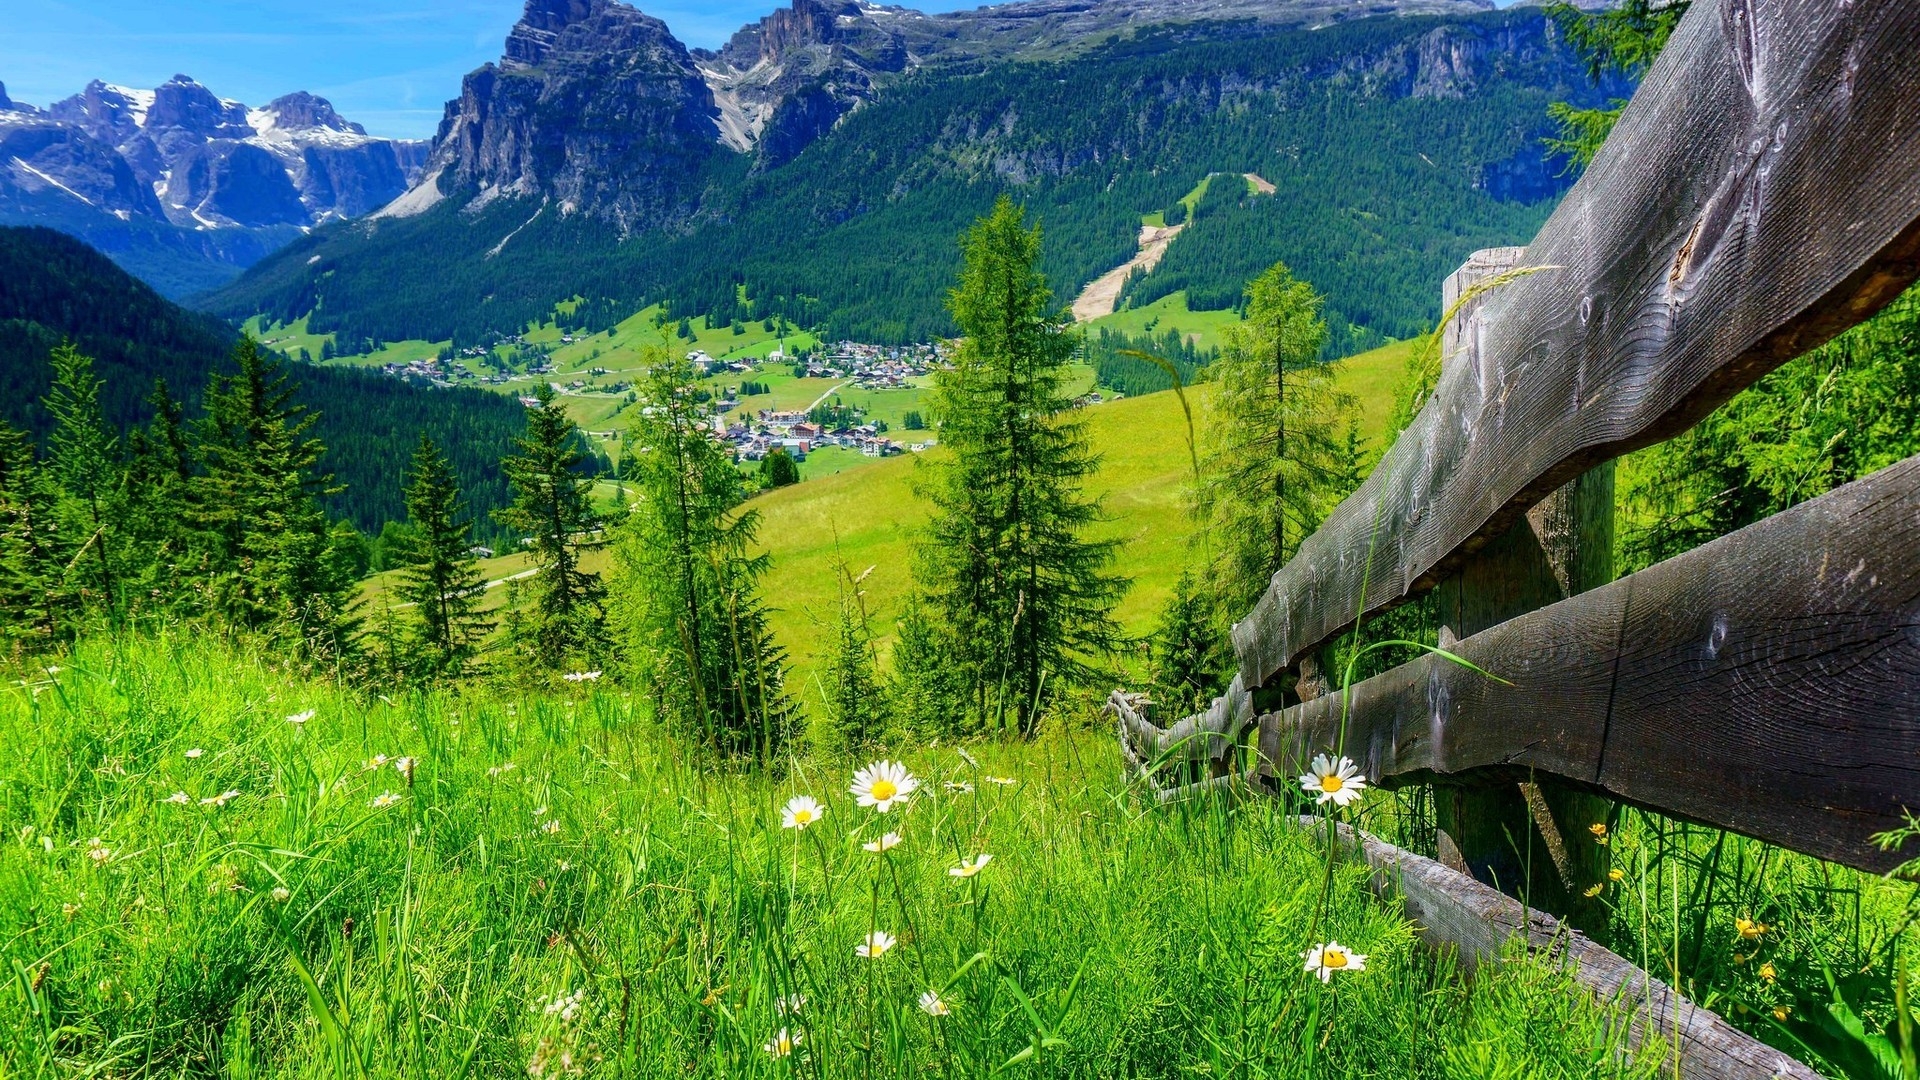 Spring Mountain Landscape for 1920 x 1080 HDTV 1080p resolution